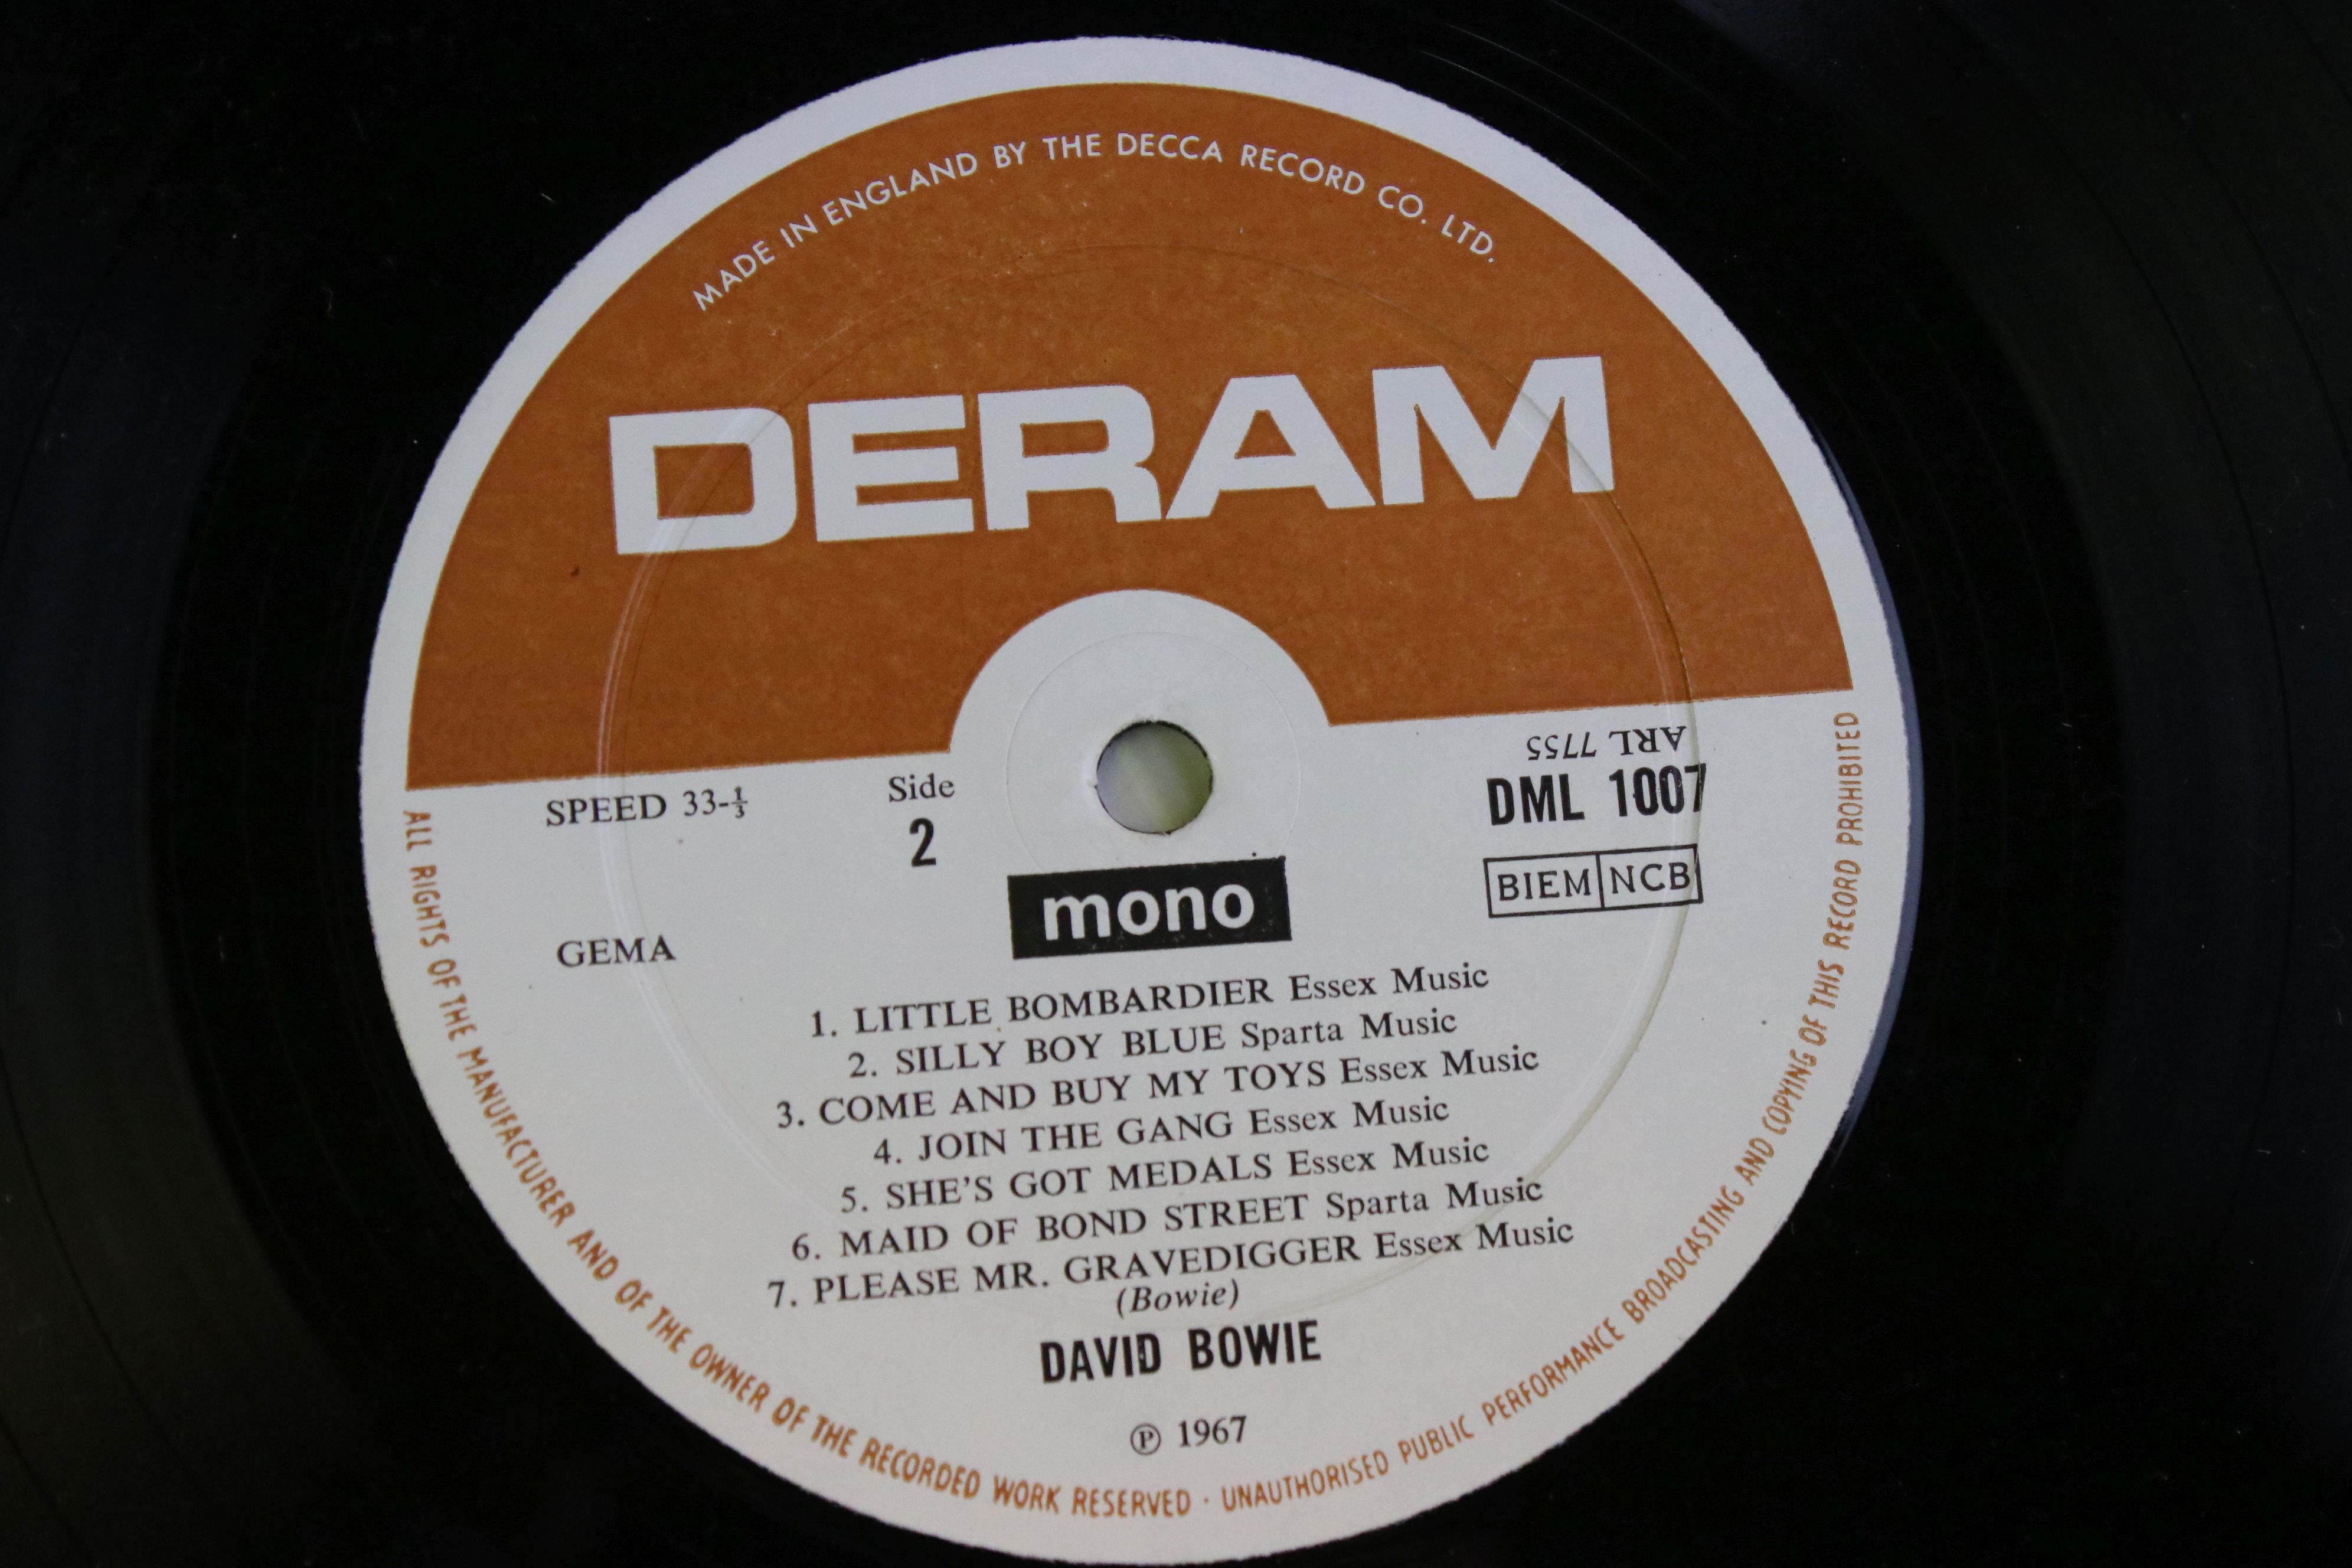 Vinyl - David Bowie Self Titled on Deram (DML 1007) mono, laminated front cover. Matrices 7754 1B - Image 3 of 6